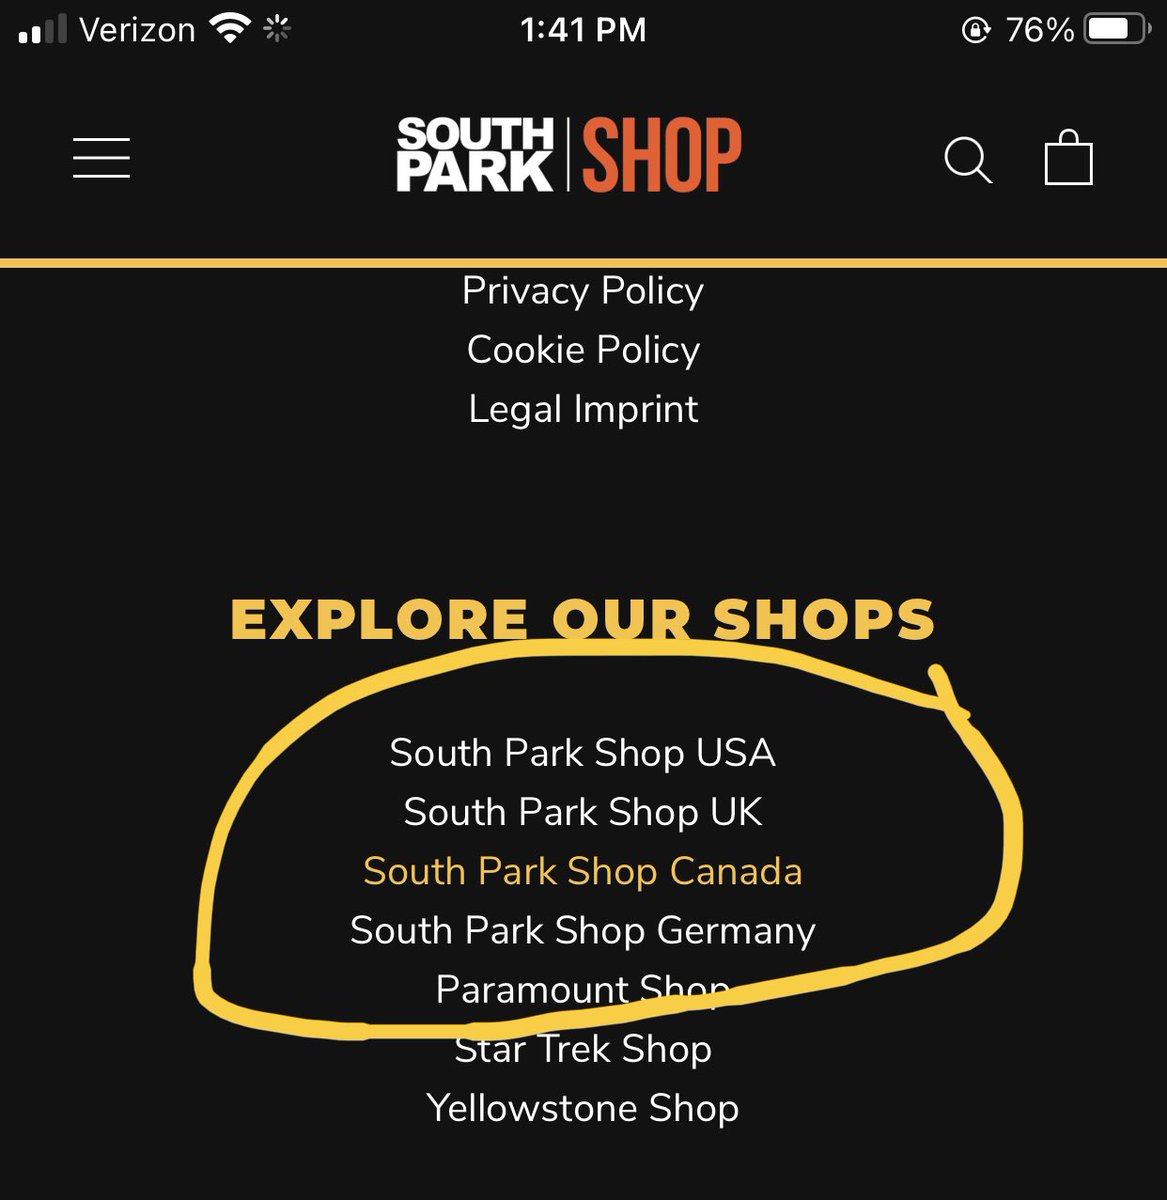 Becoming more hopeful about the opportunity for @AMCTheatres to ship internationally which would be significant. Here is the South Park shop that Snow Commerce supports. Game changer if the #AMCTheatresShop does this as well. southparkshop.com